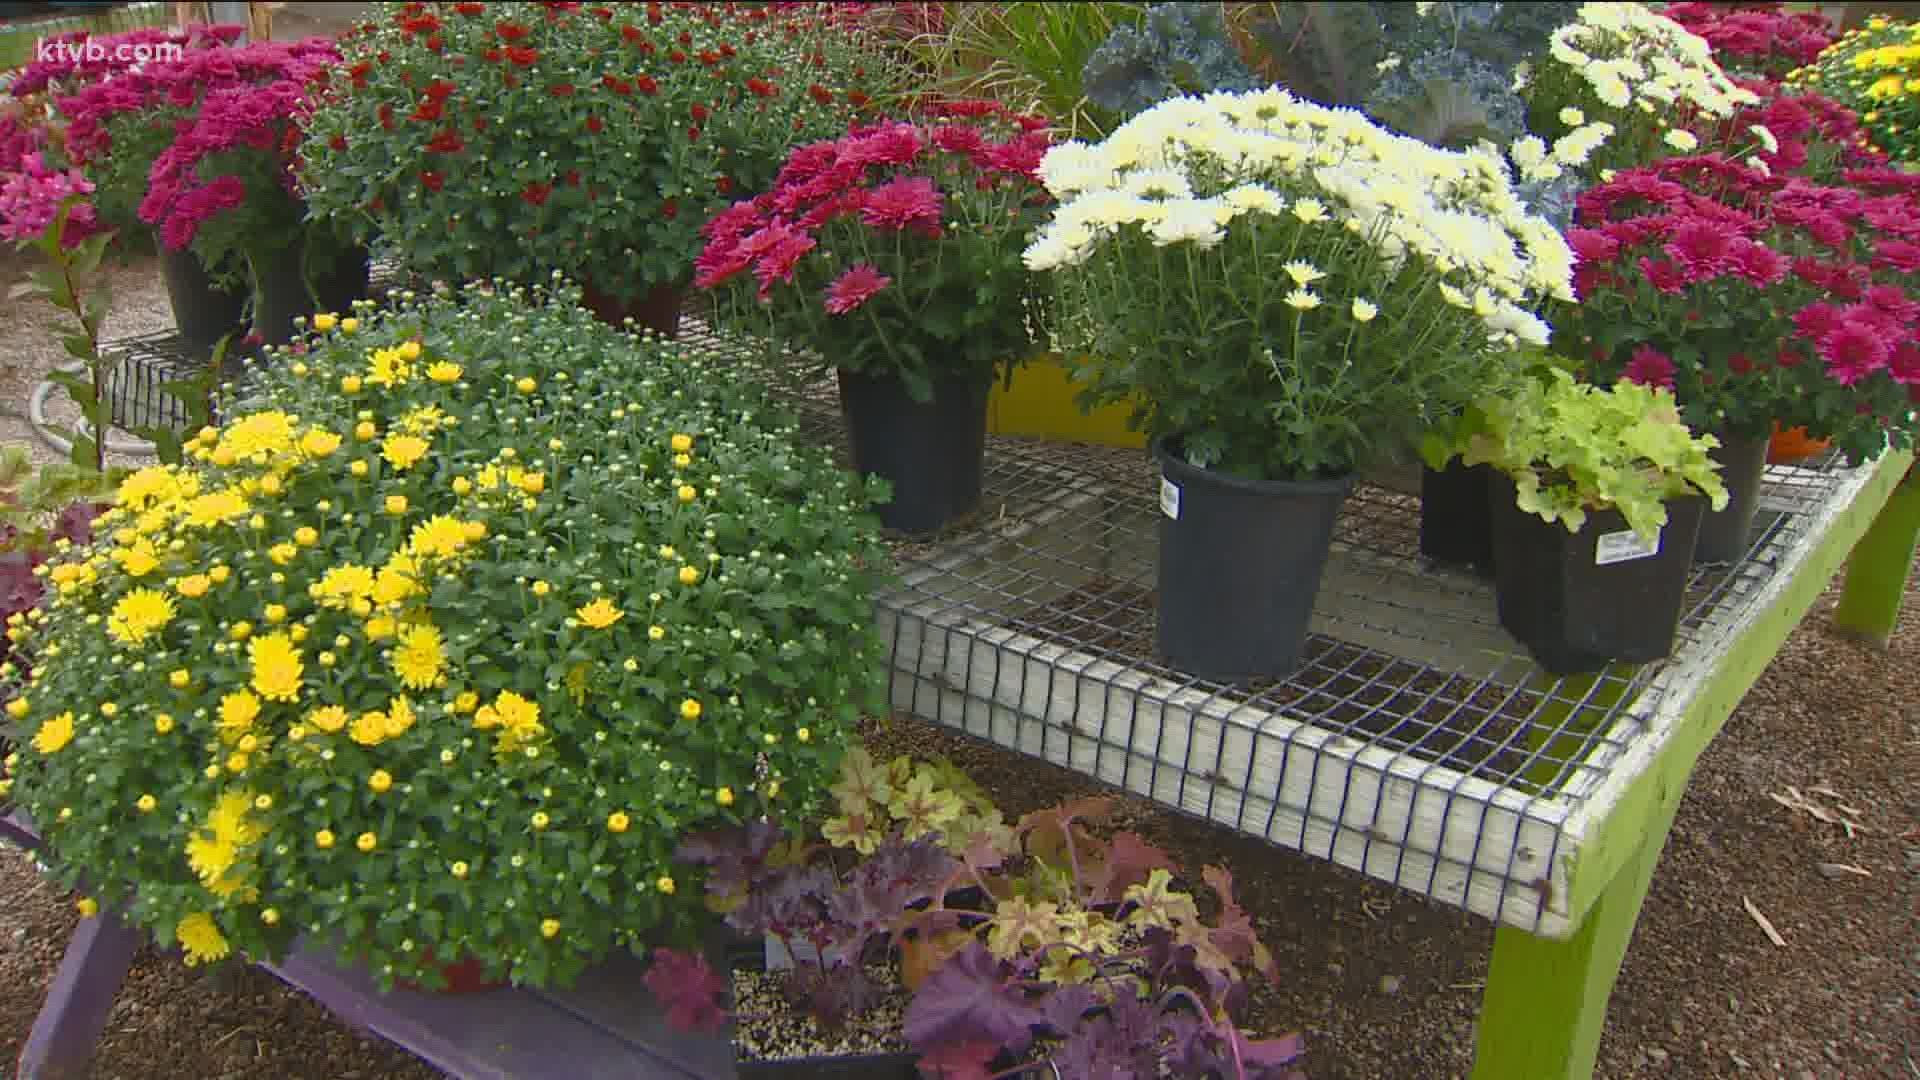 As the weather gets colder, here's how you can keep some color in your yard well into the fall.